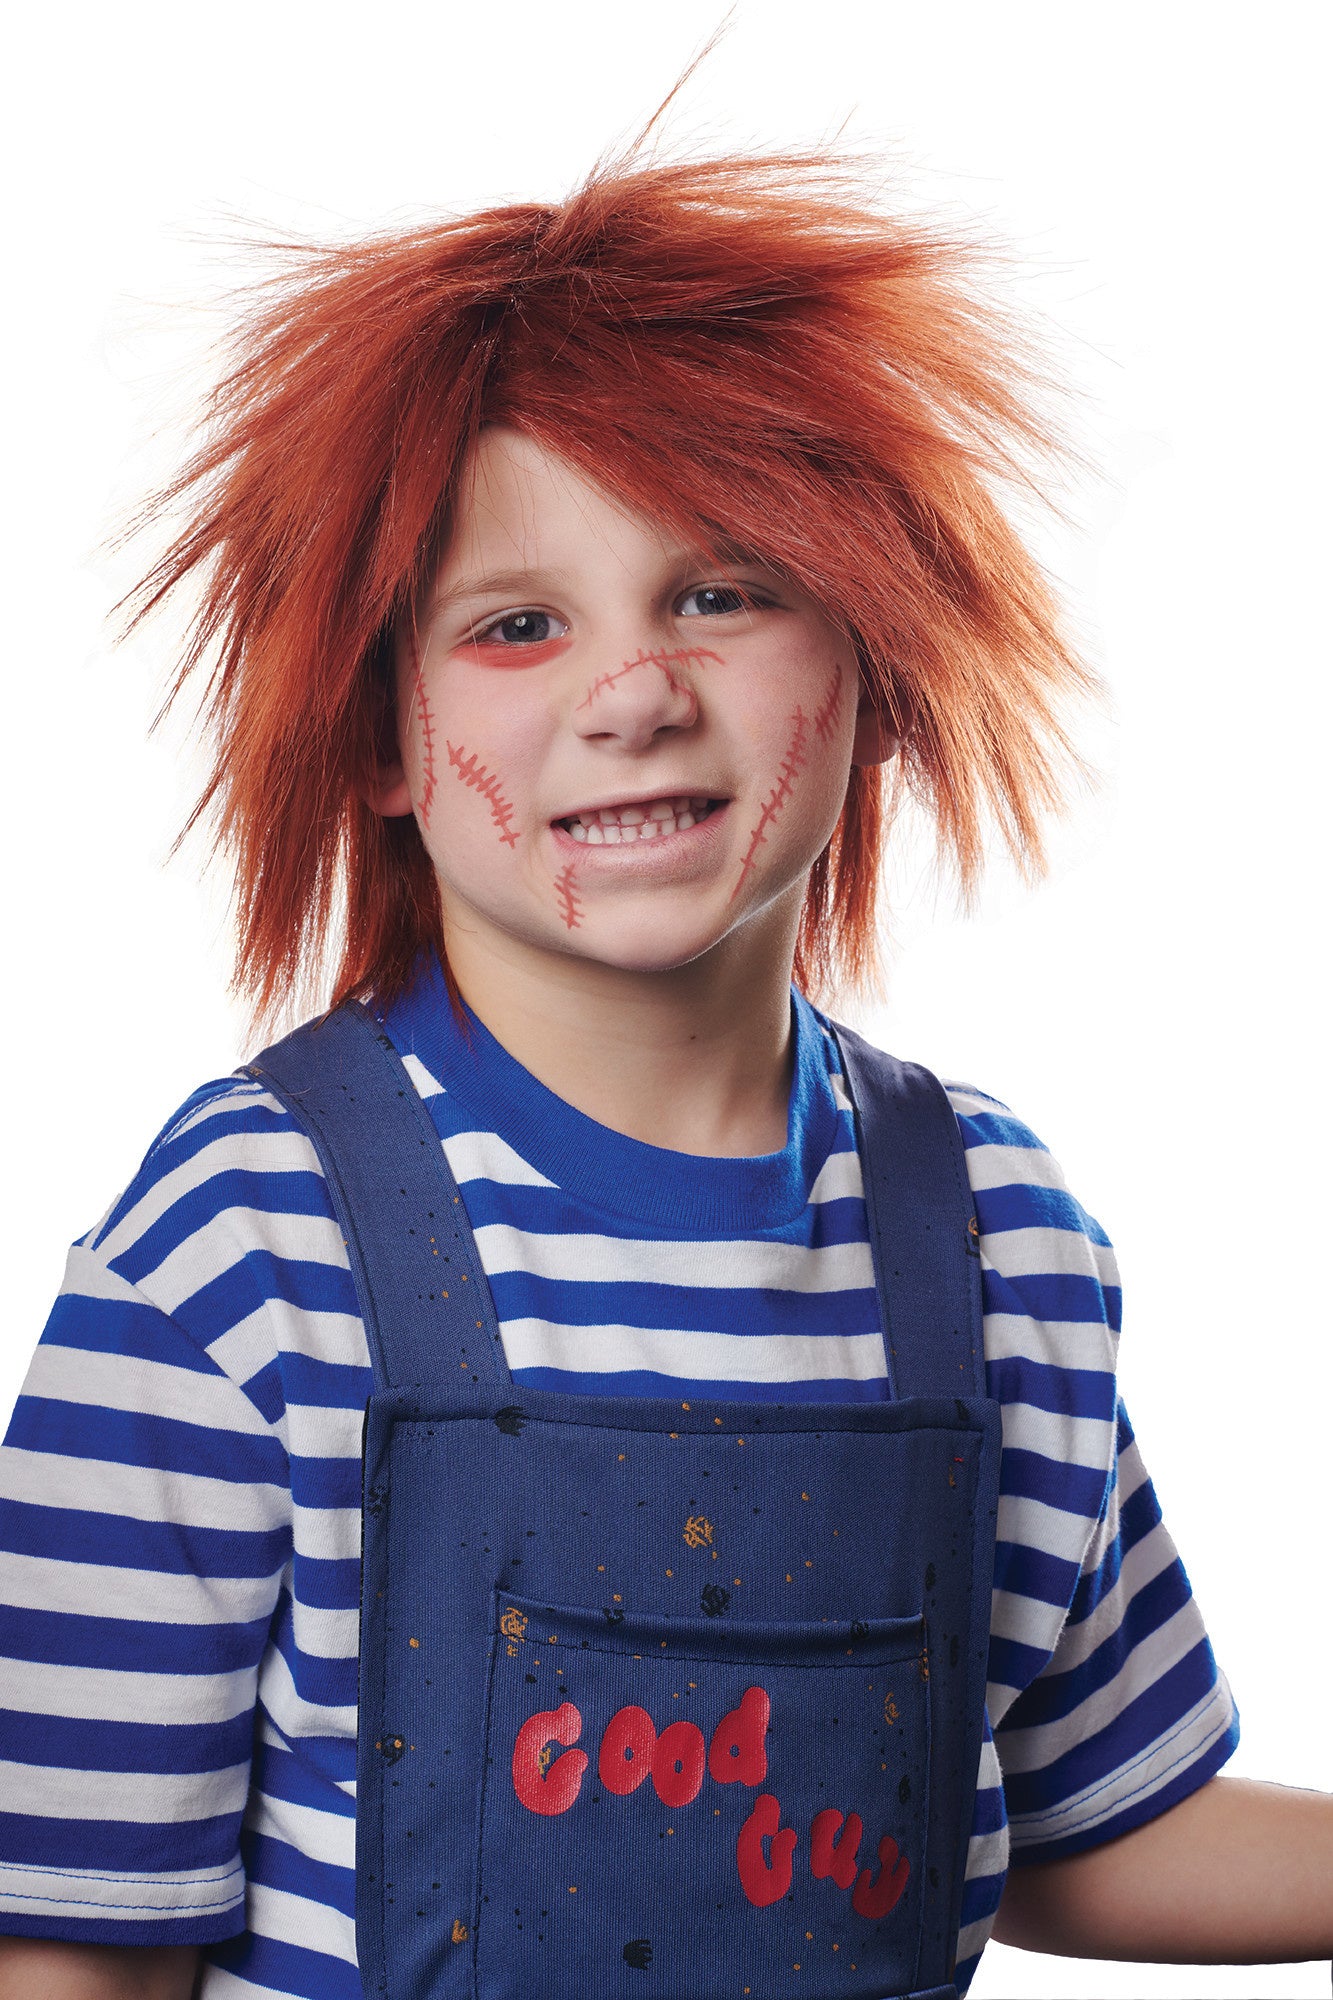 Evil Doll Child Costume Wig Red